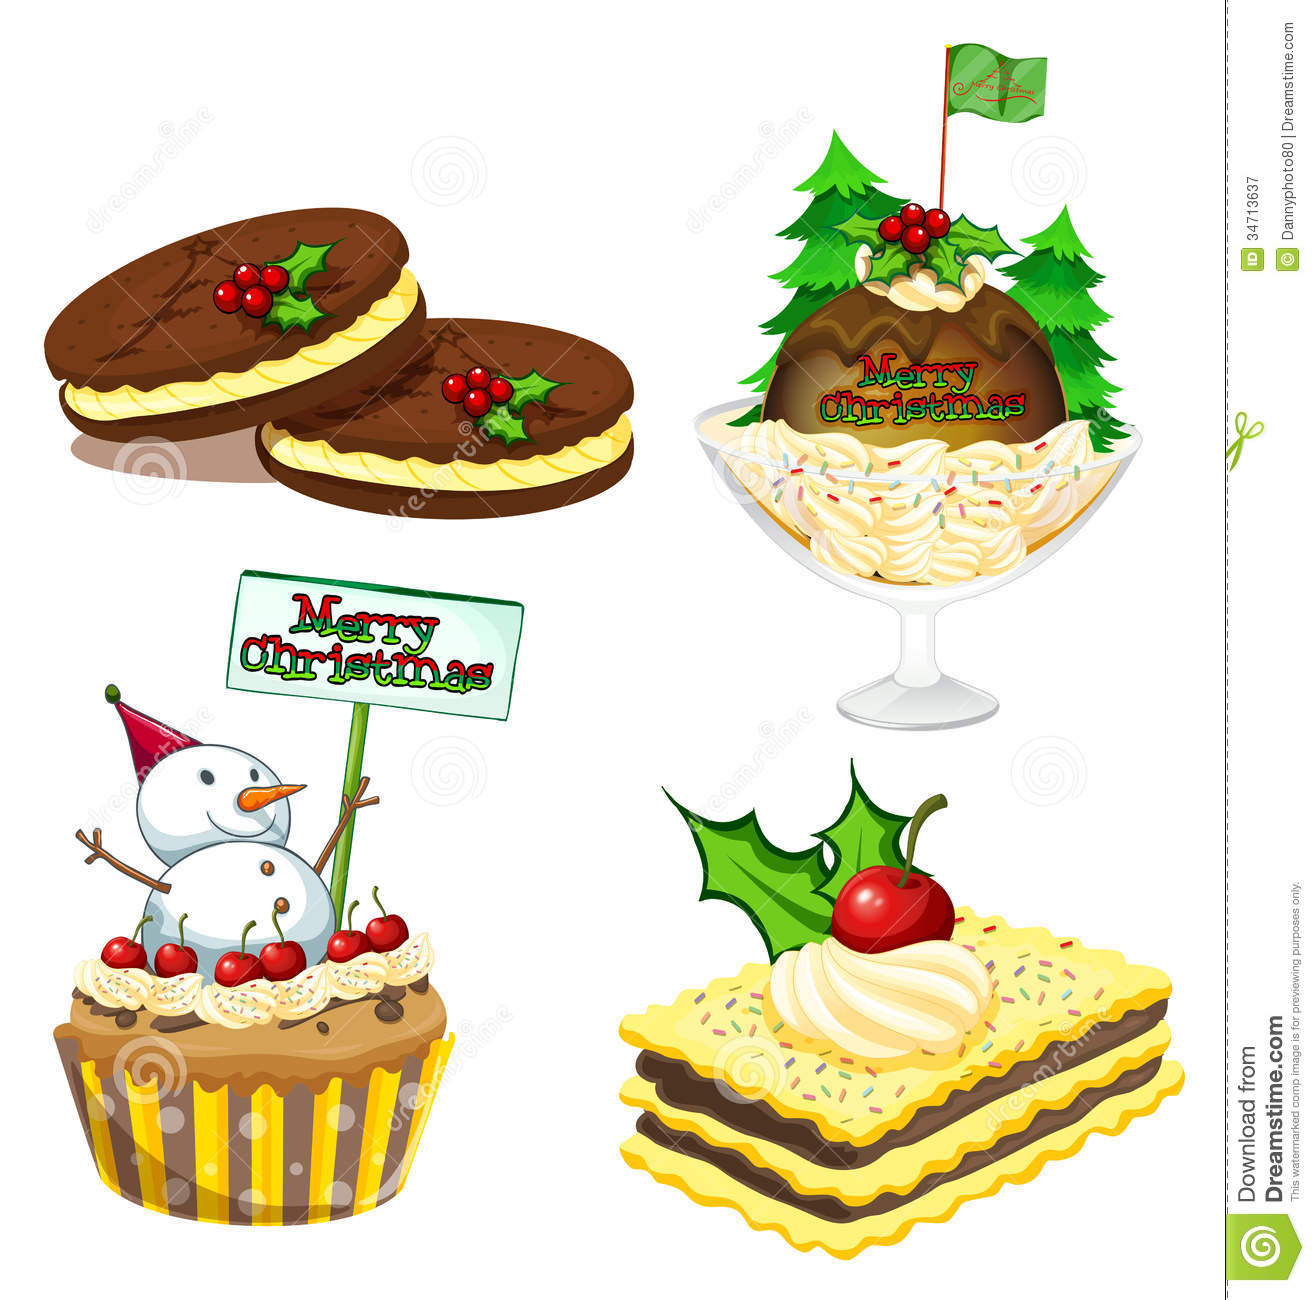 Four Desserts For Christmas Royalty Free Stock Photography   Image    